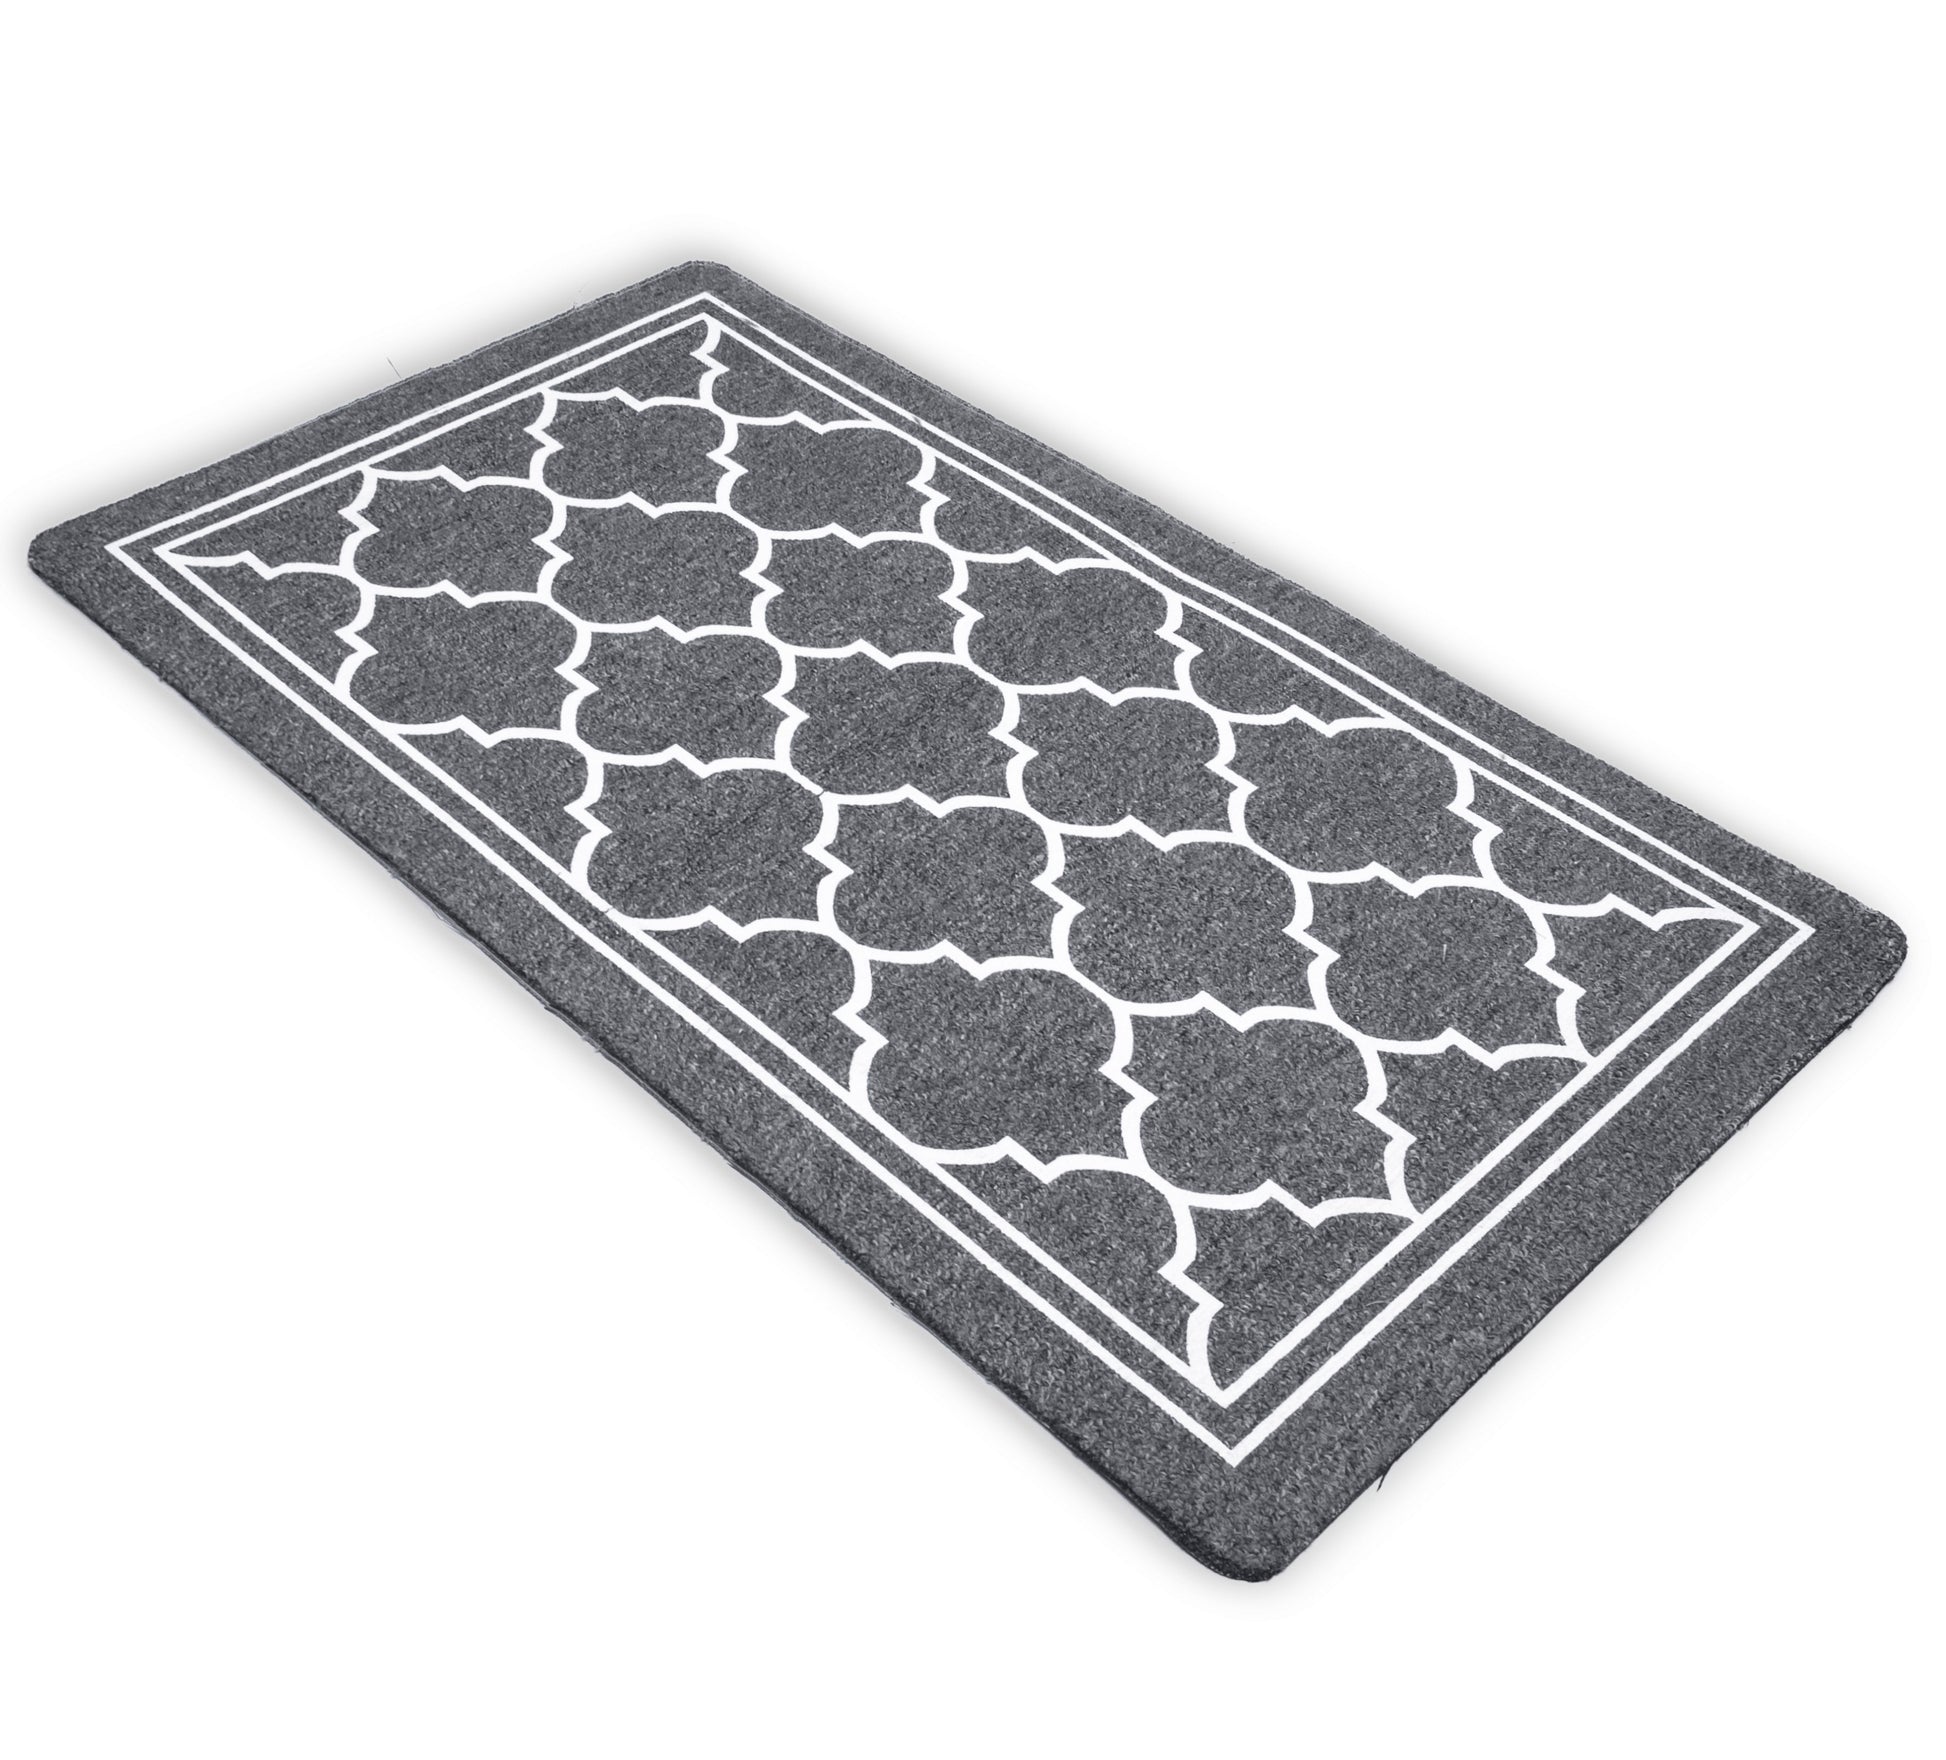 Slonser Extra Durable Door Mats For Outside Entry 18X30 Dirt Trapping  Outdoor Welcome Mats, Non-Slip Rubber Outdoor Door Mats, Low Profi